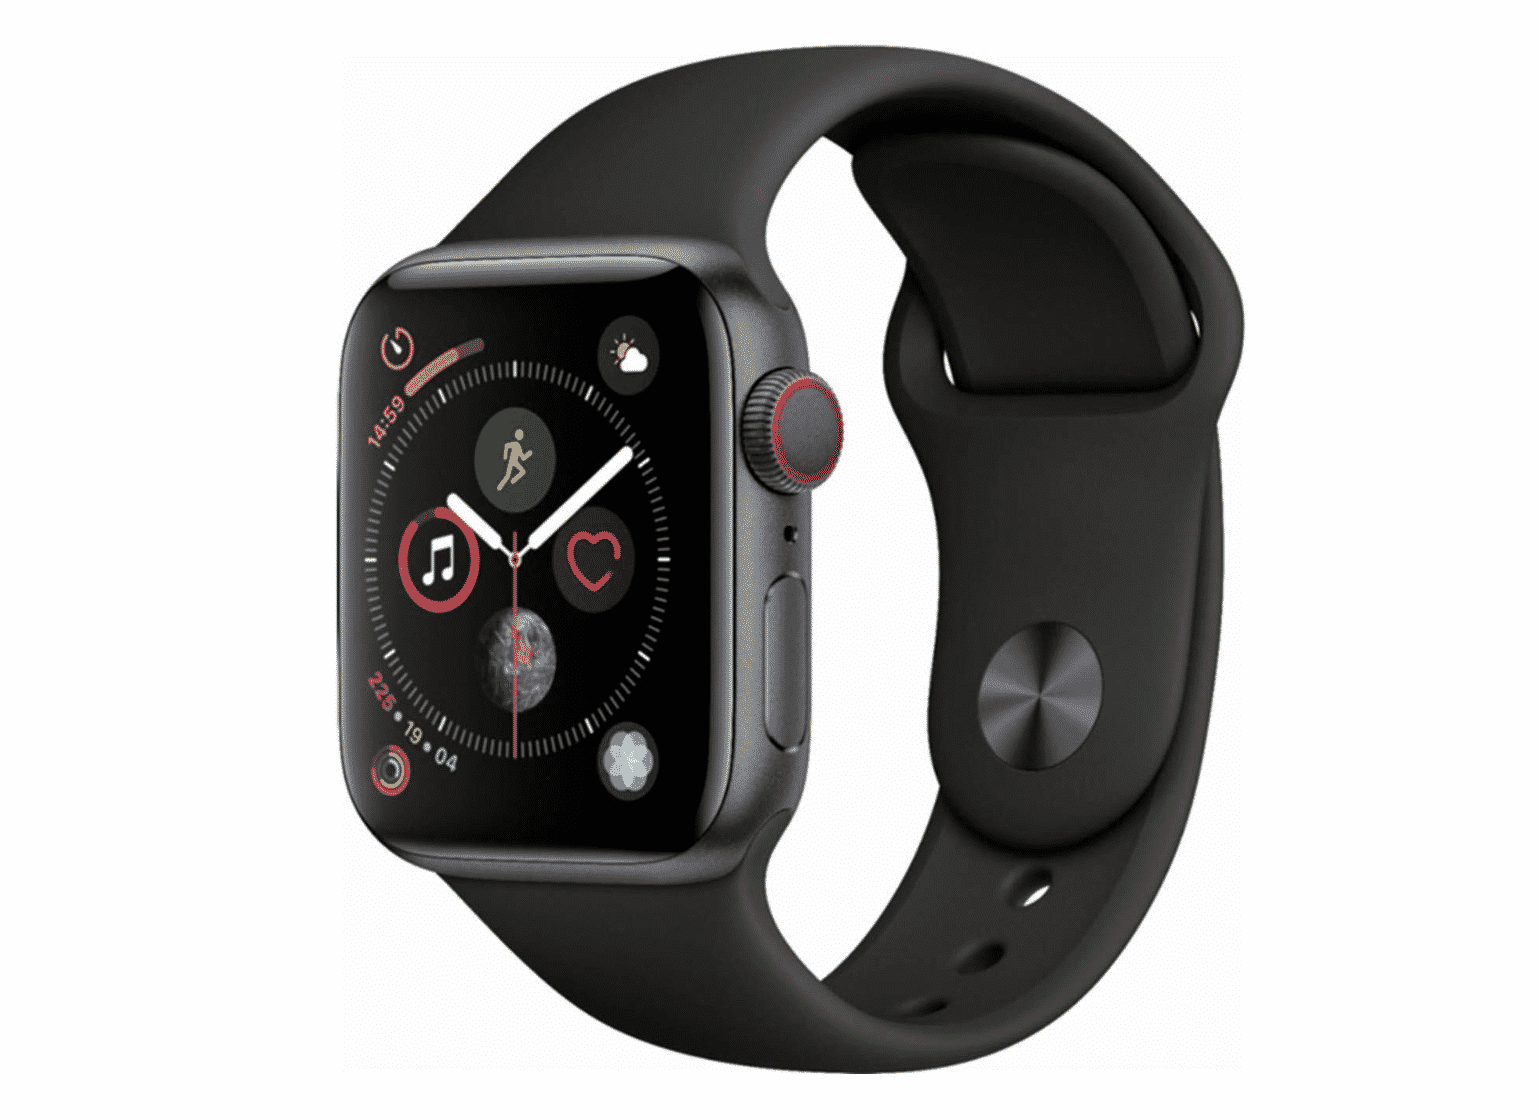 Get a Refurbished Apple Watch Series 4 for Only $309.99